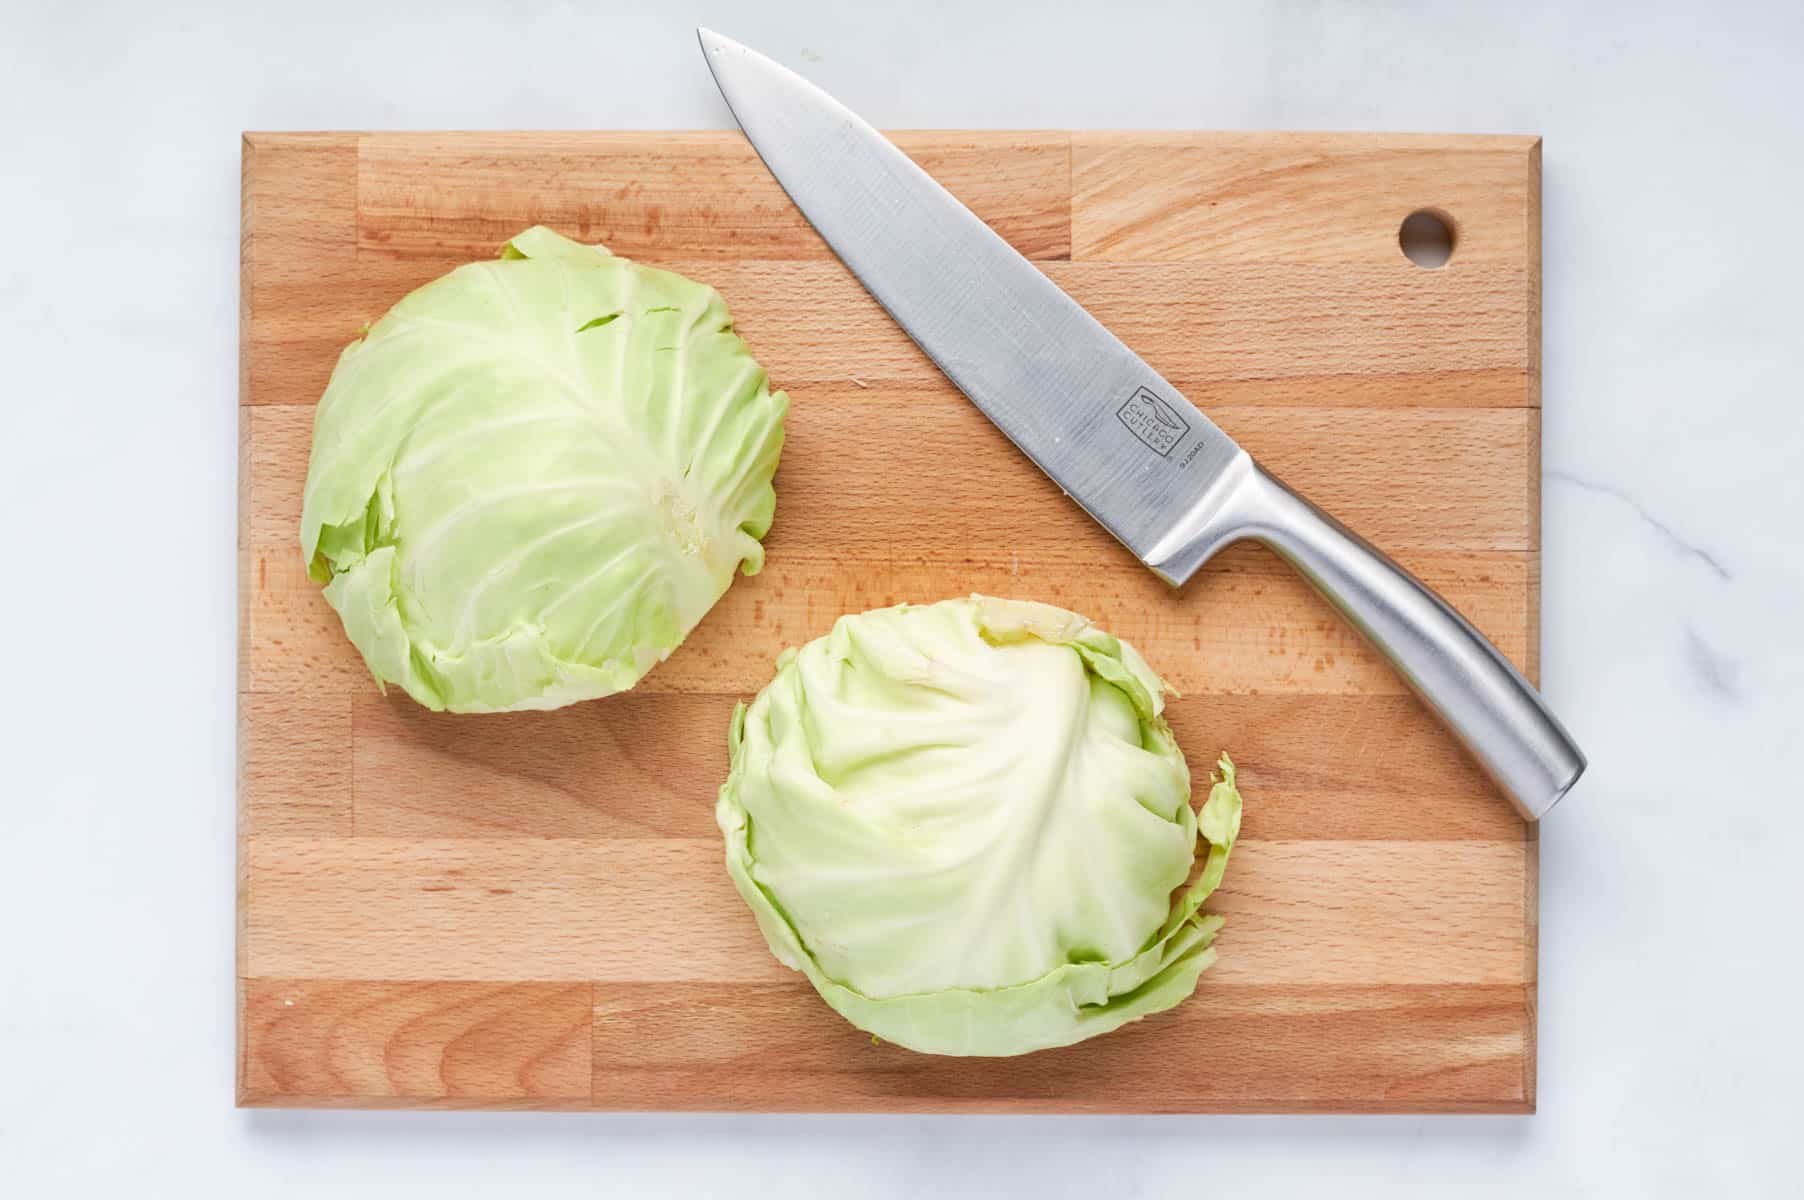 A head of cabbage is sliced in half.